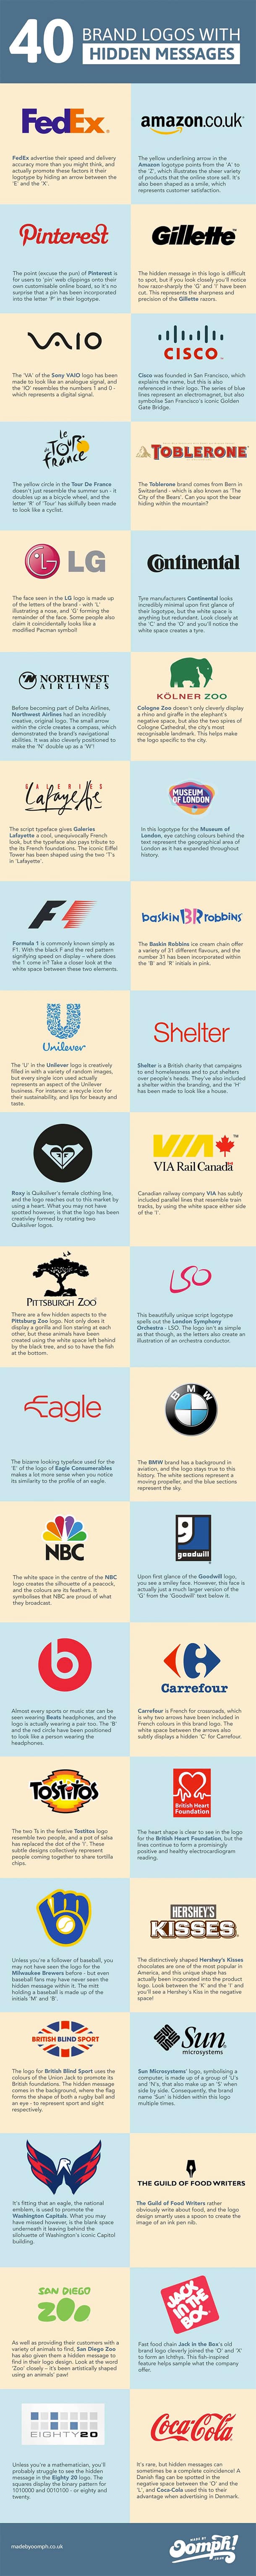 40 Brand Logos With Hidden Messages Infographic